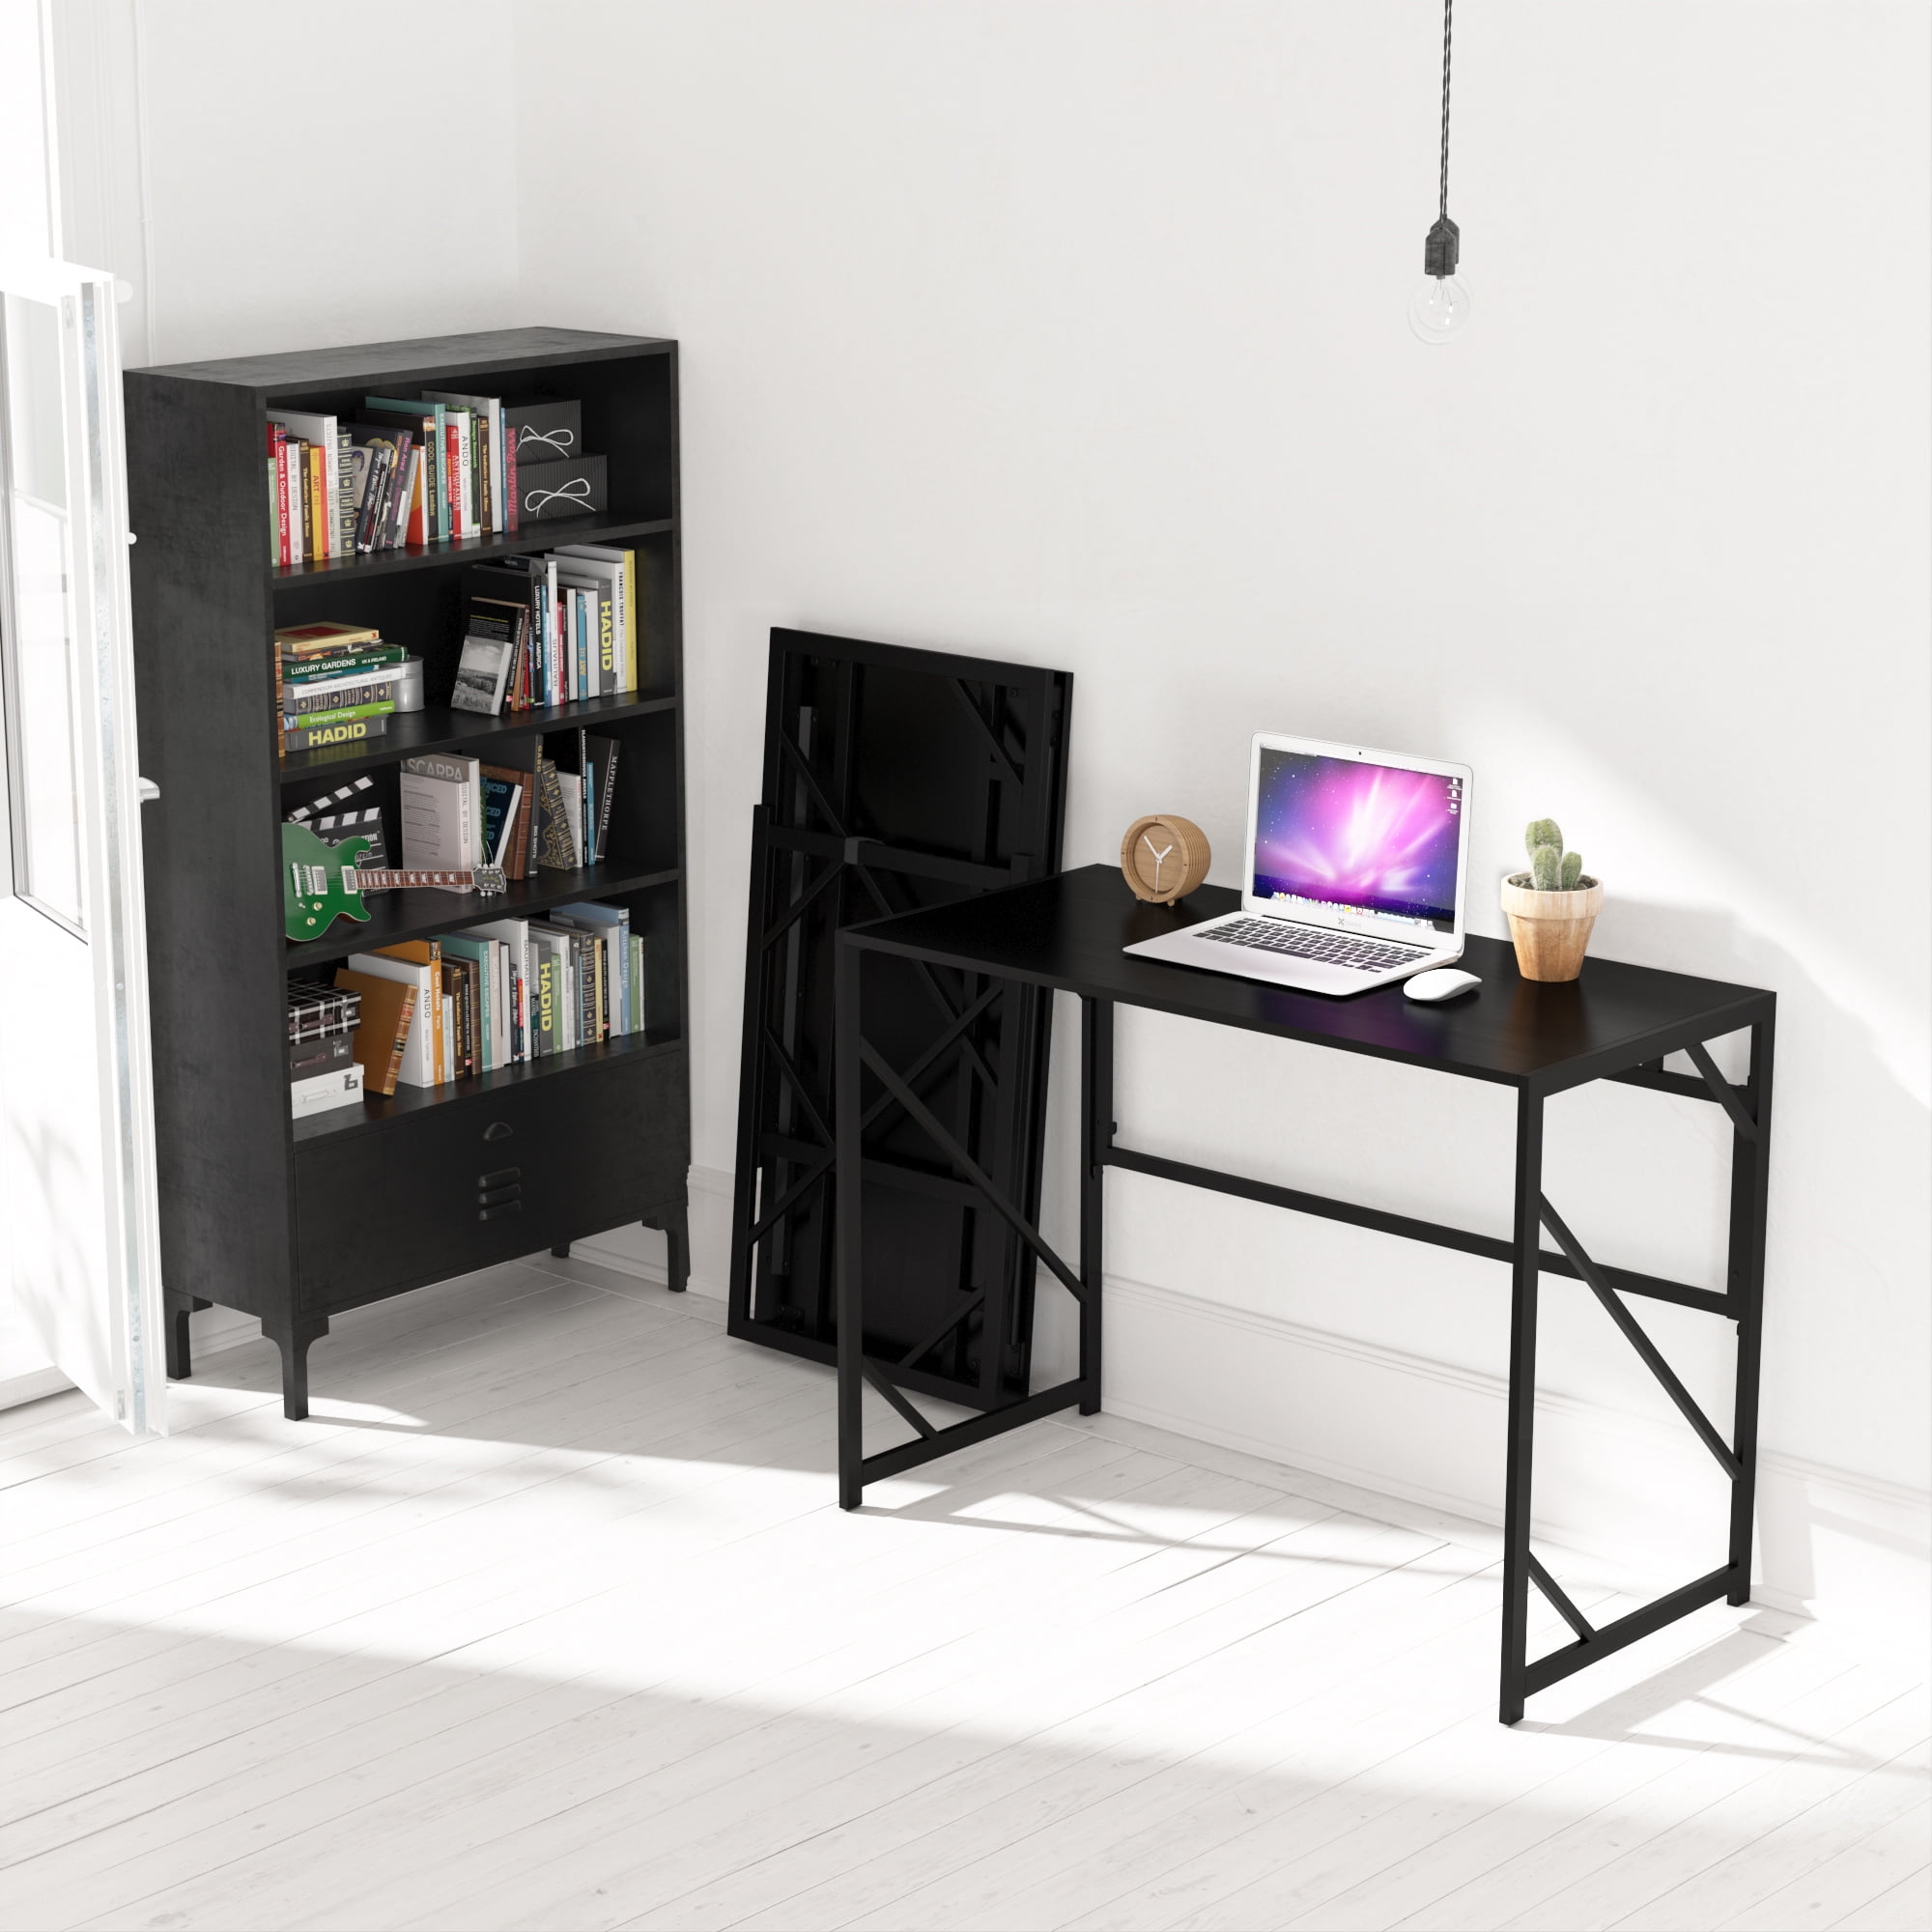 Details about   Folding Study Writing Table Computer Desk Home Office Timber Black Steel Top 